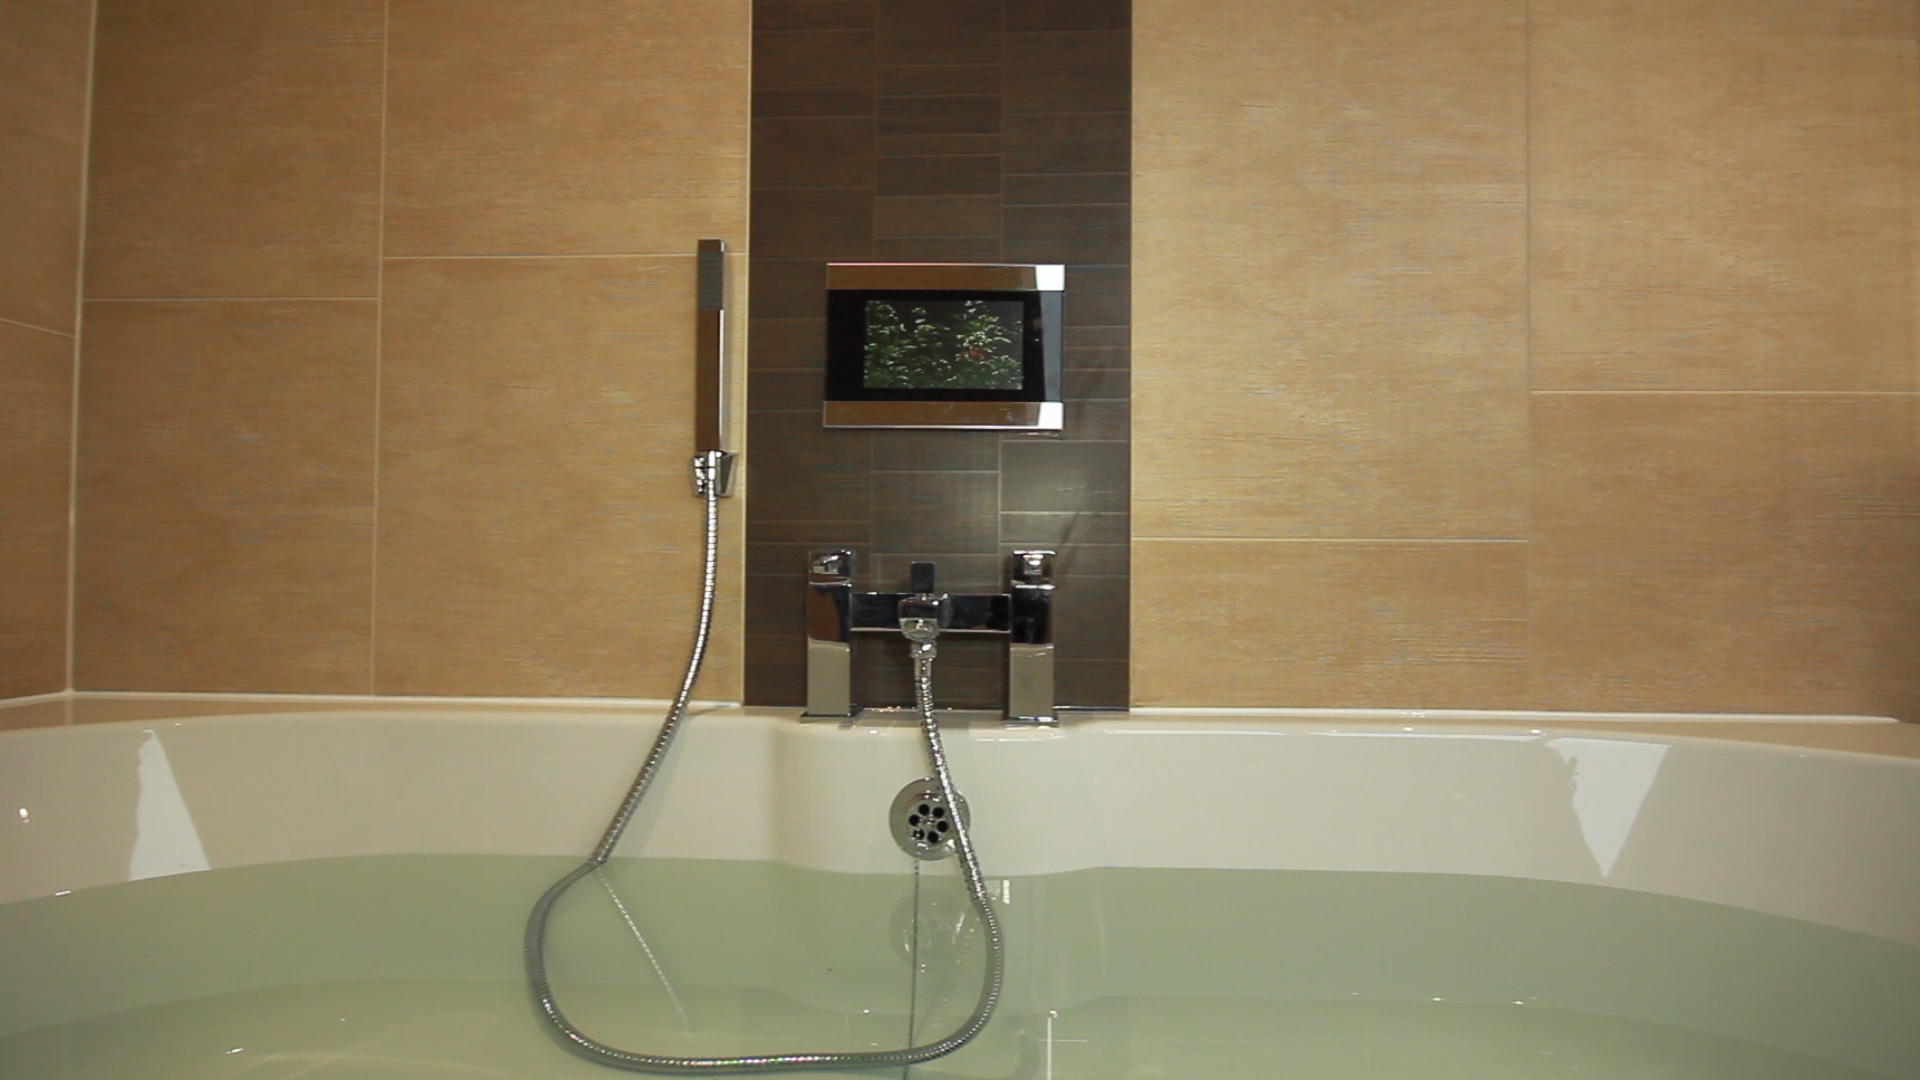 Photo of Audio Visual Bathroom Solution in situ showing a TV Screen fitted over the bath